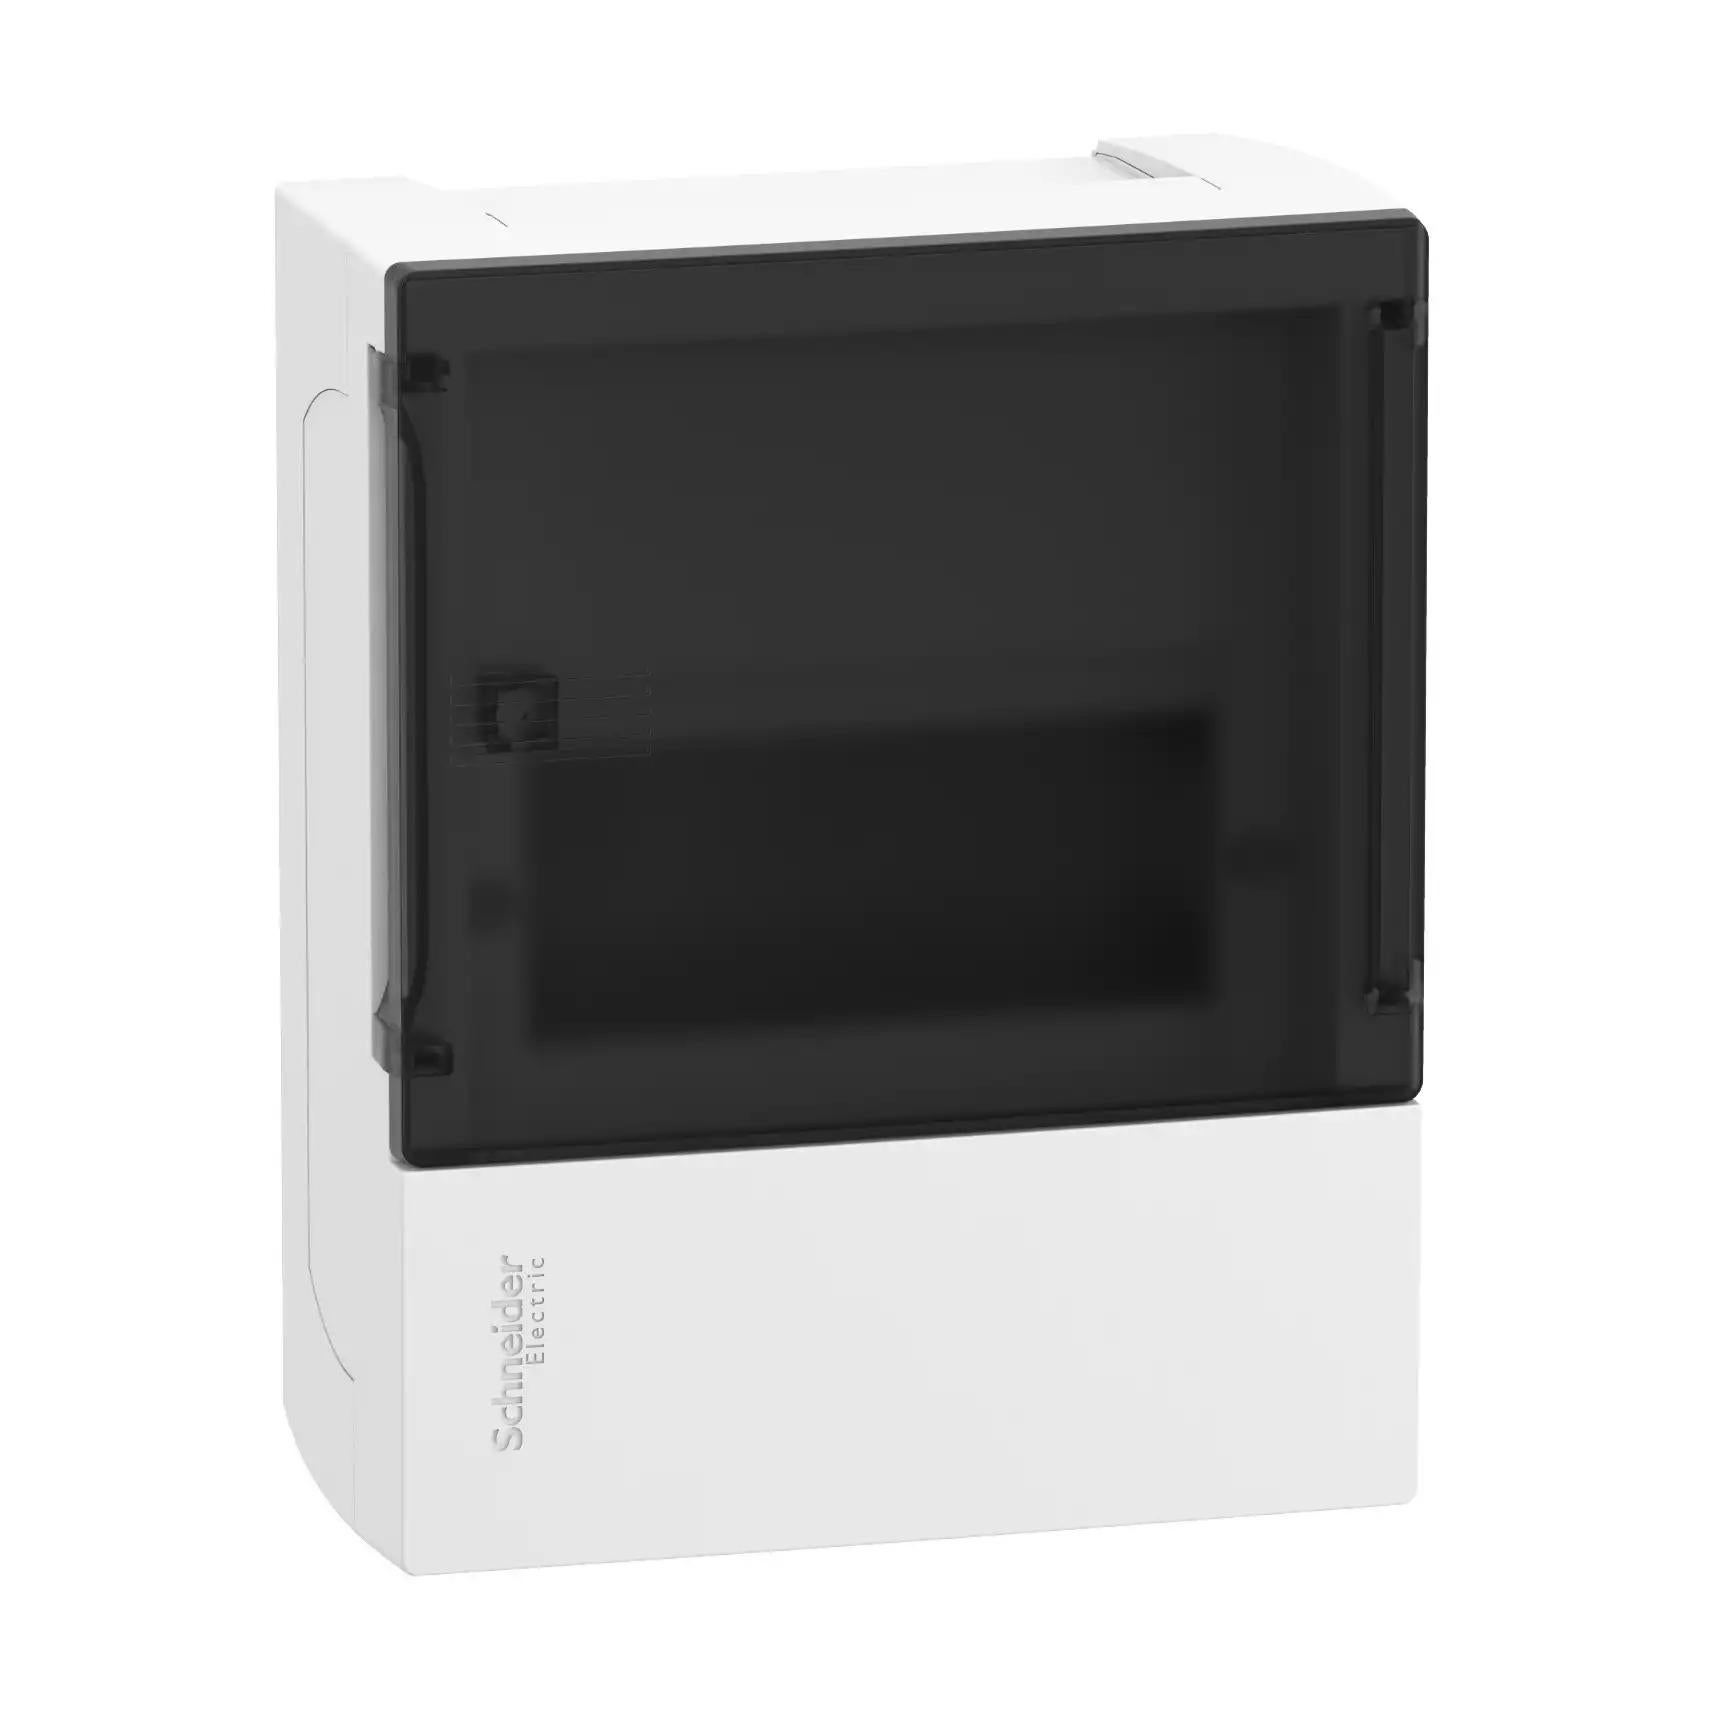 Enclosure, Resi9 MP, surface mounting, 1 row of 6 modules, IP40, smoked door, 1 earth + 1 neutral terminal blocks